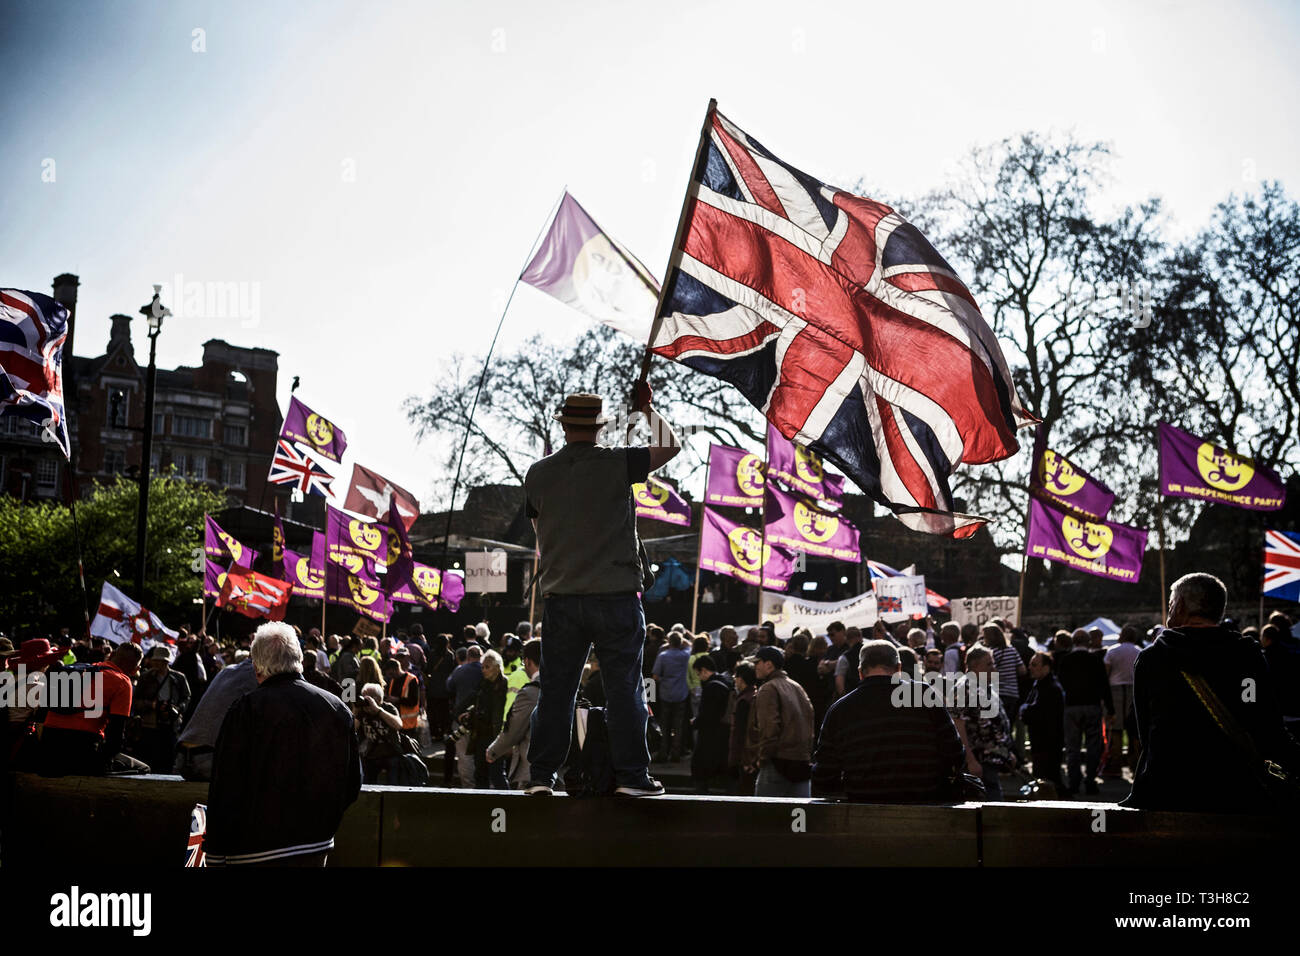 Political rally uk/ politics uk/ political protest- protester holding a flag on a peaceful march pro Brexit rally in 2019.  Britishness. Patriotism. Stock Photo